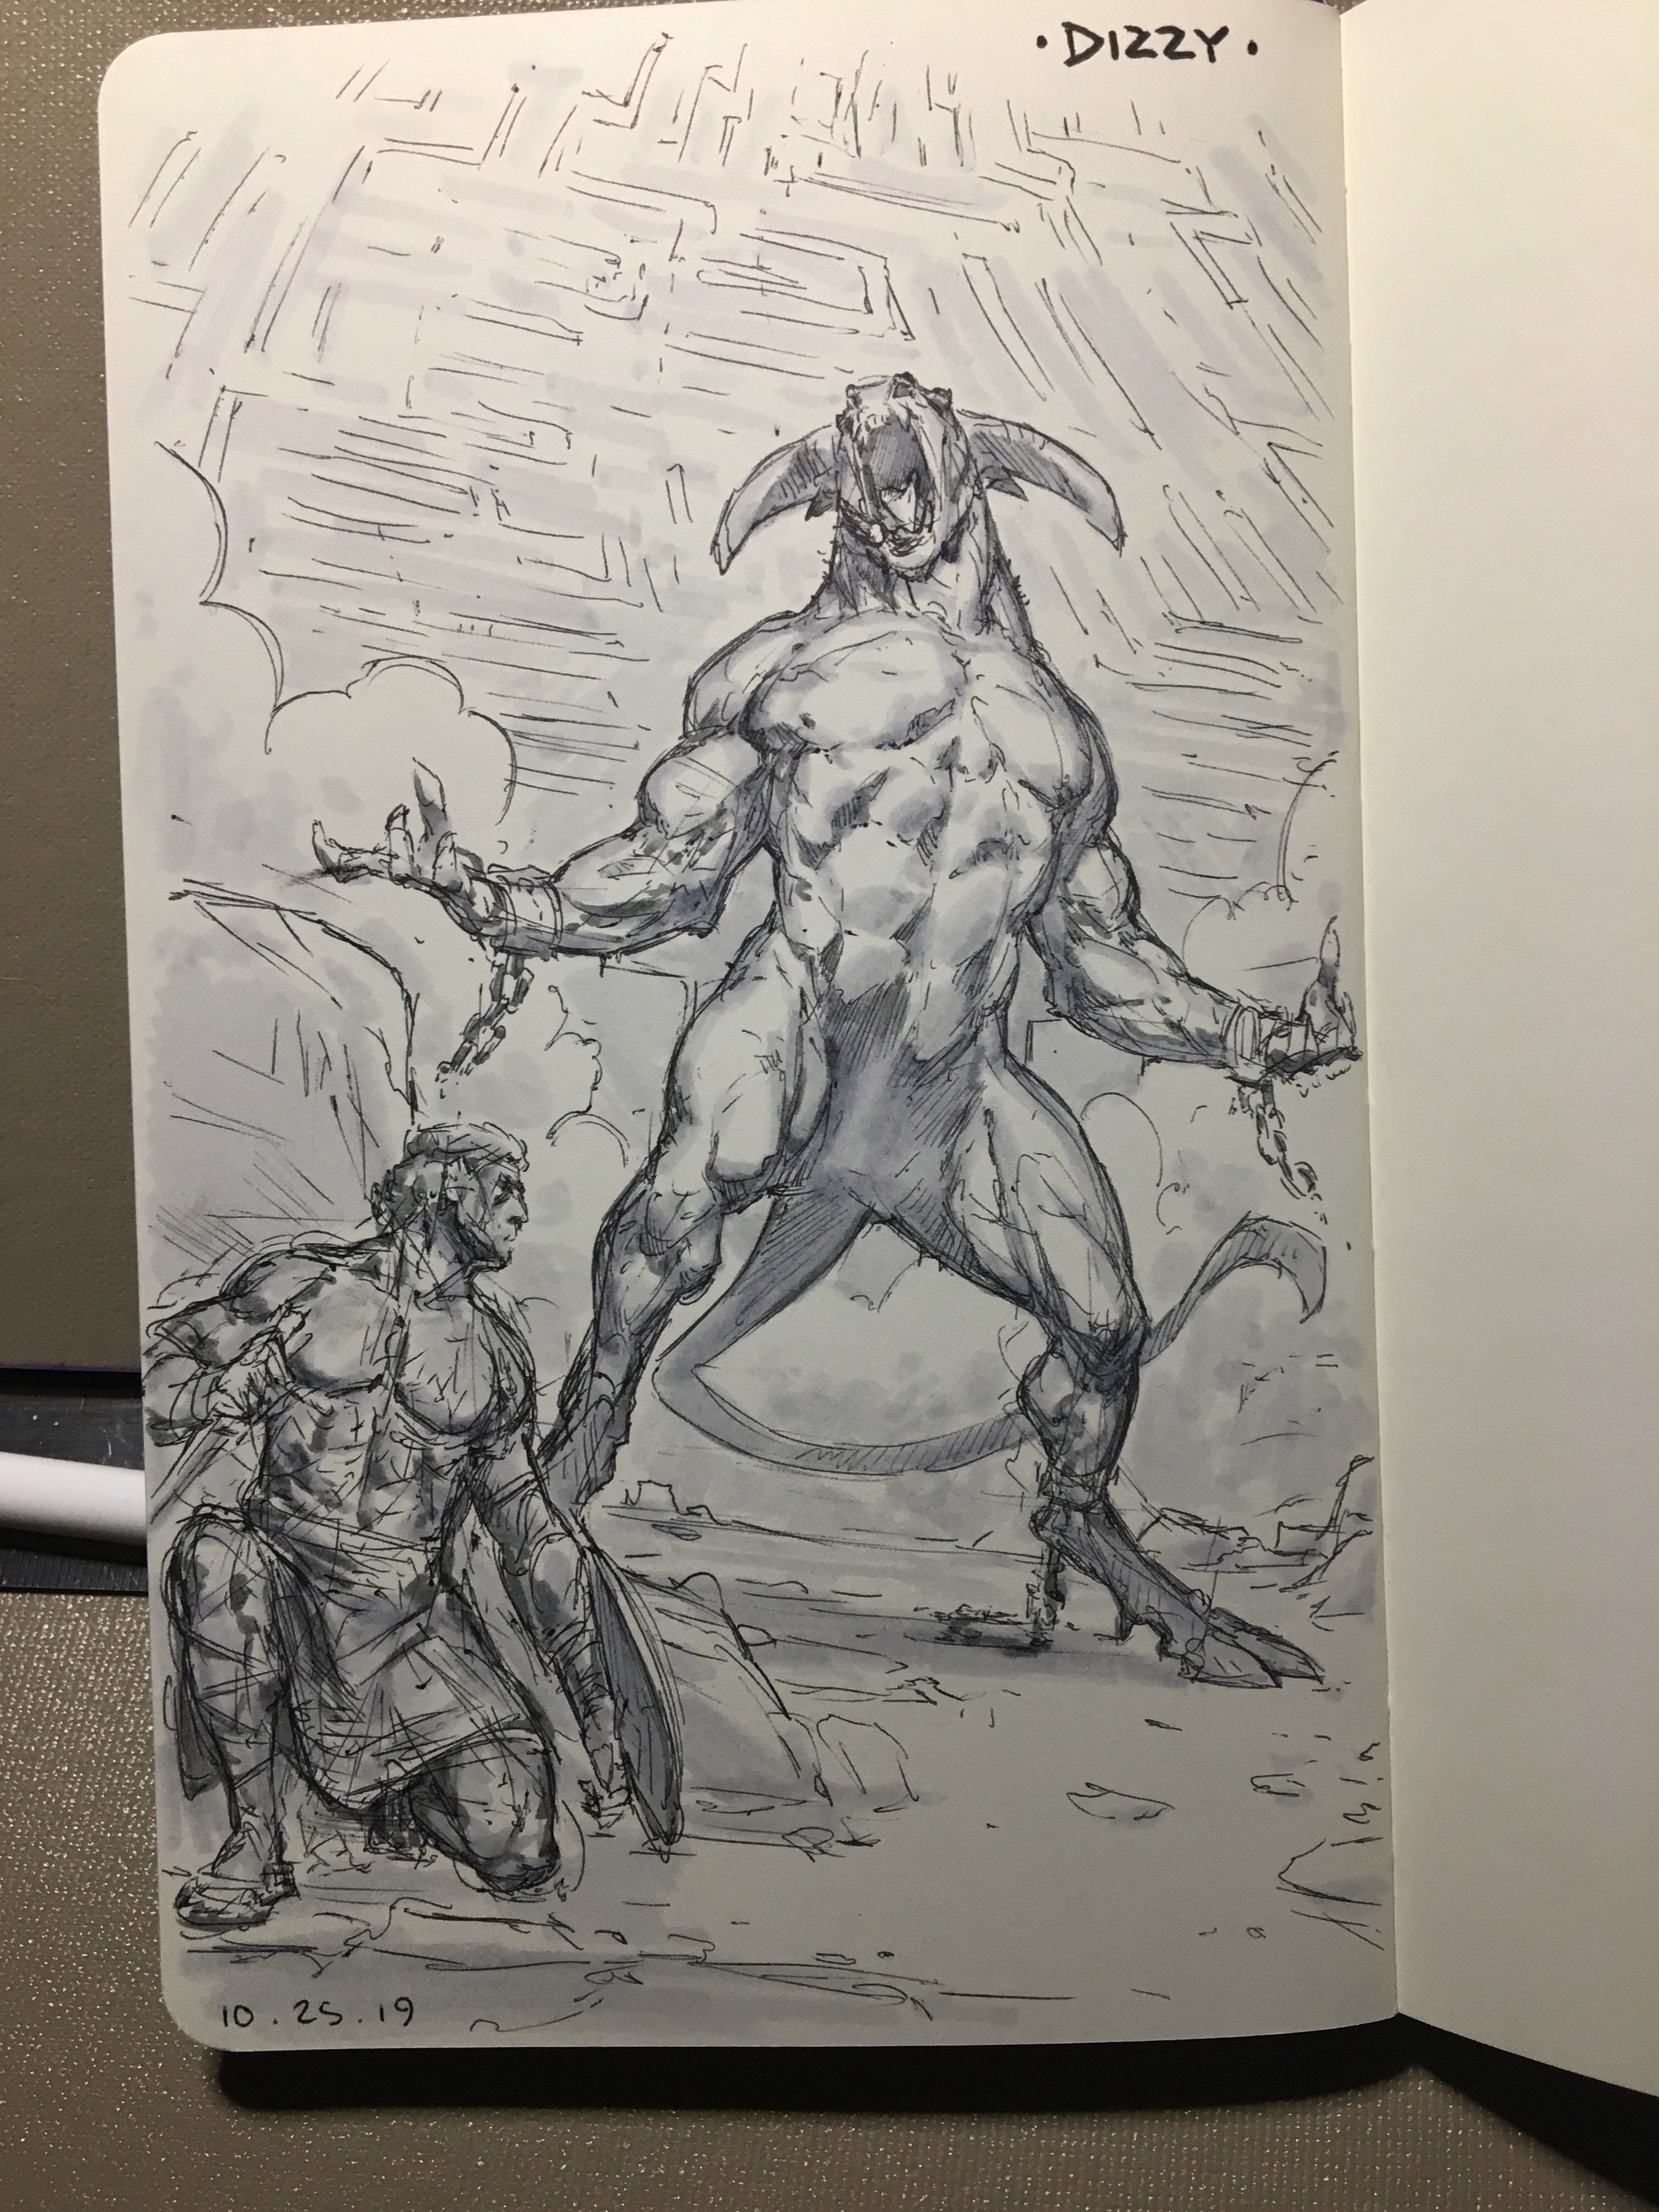 Day 24 of inktober 2019! Dizzy! Battling the Minotaur while keeping track of where you are in the Maze may prove to be highly disorienting!! 😱